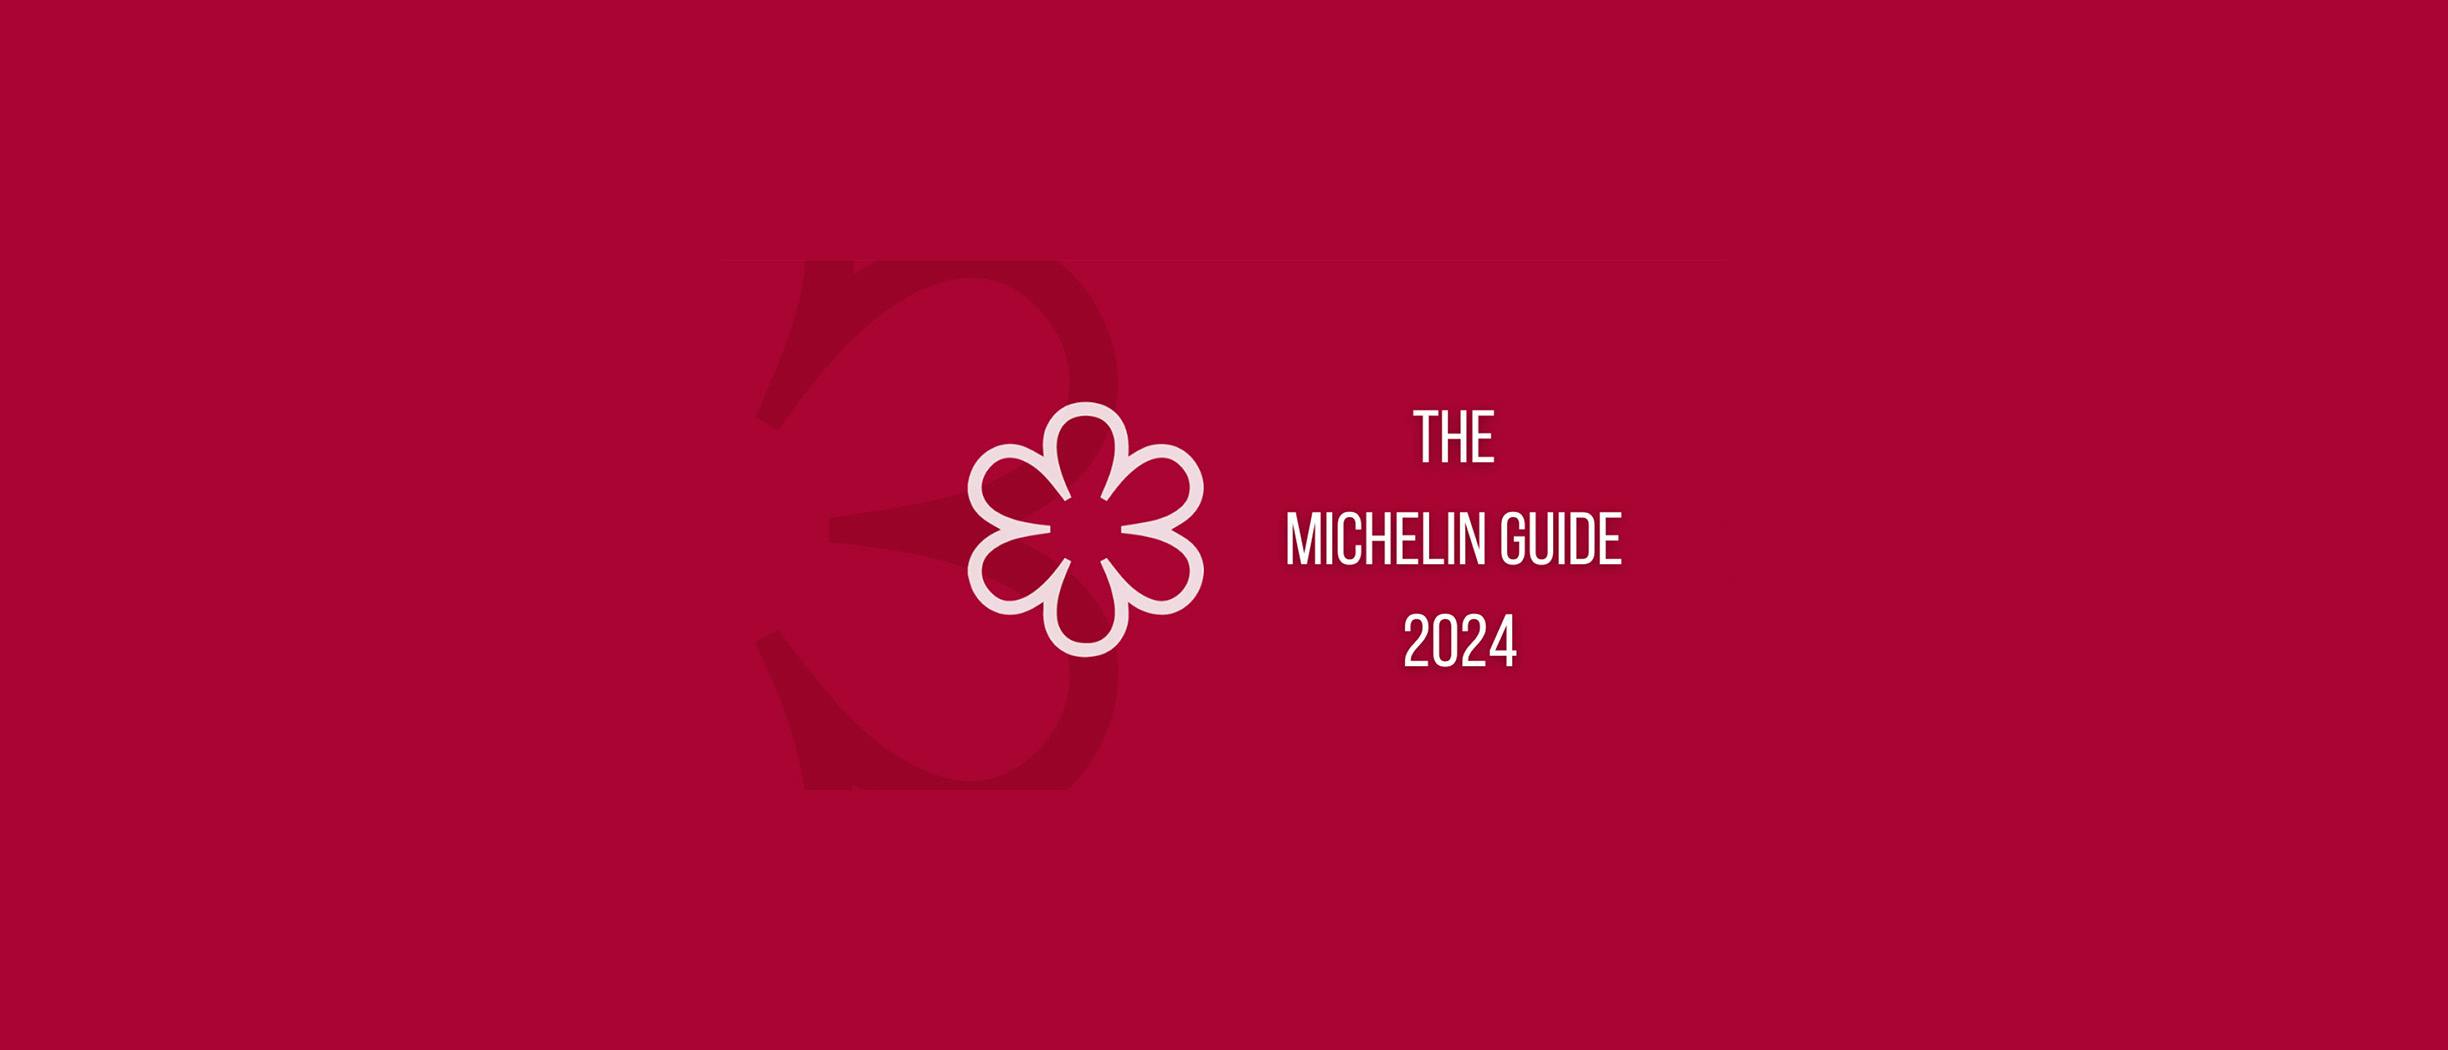 Michelin Guide 2024 auhind